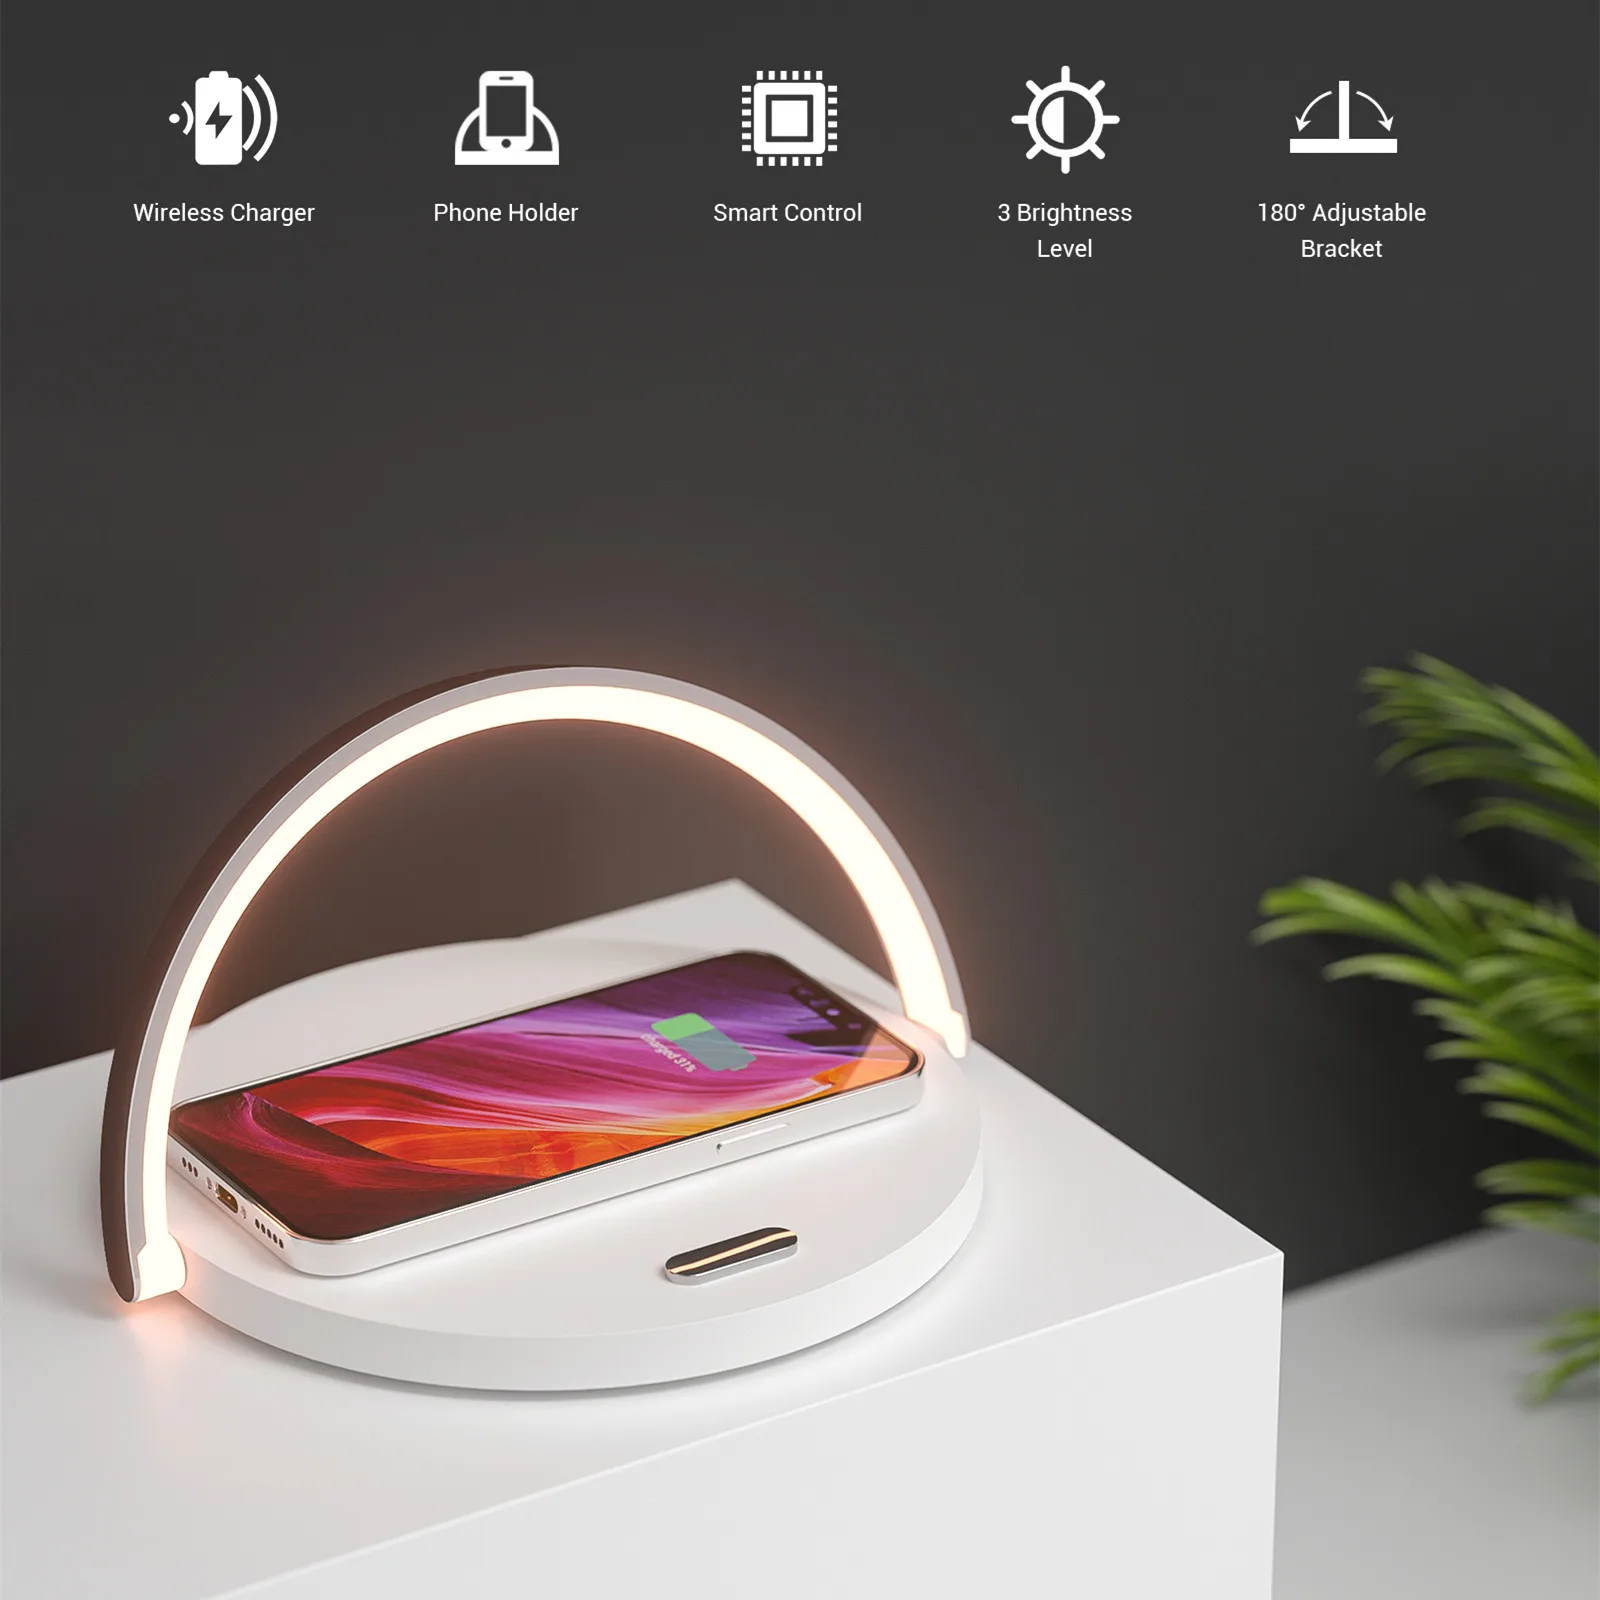 Wireless Charger Table Lamp Bedroom Lamp Support for IPhone Samsung Huawei - $26.94